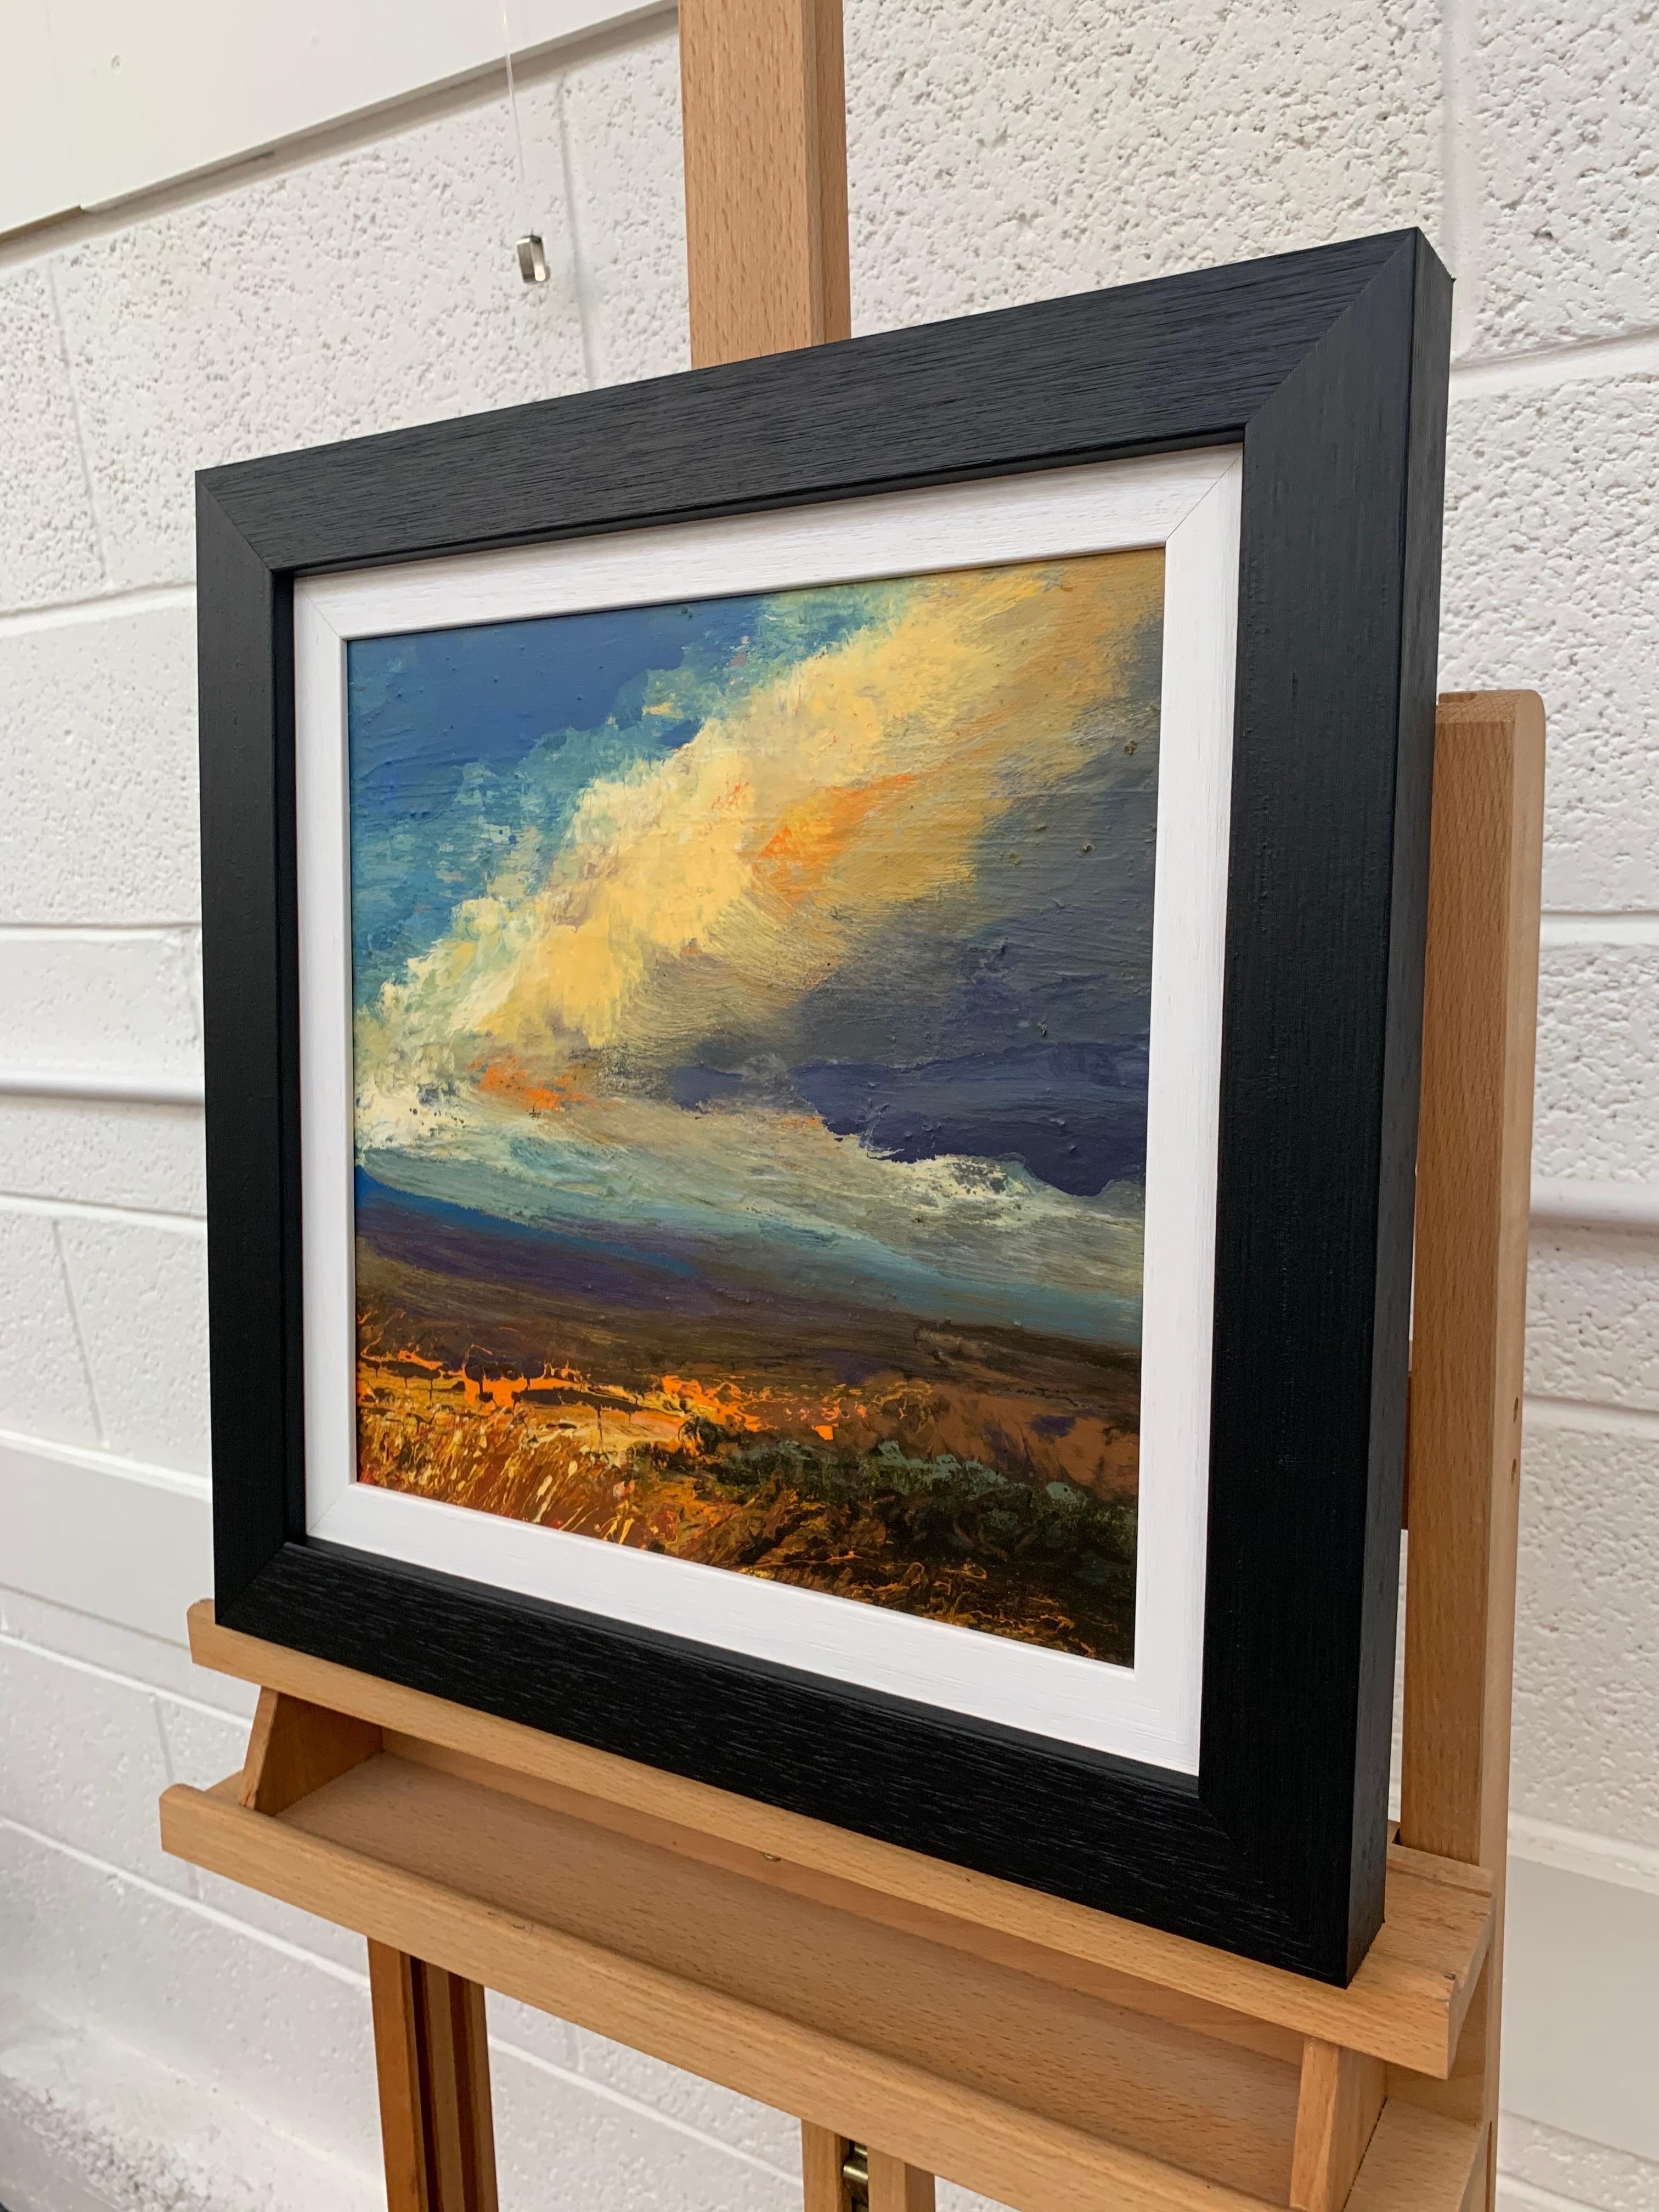 Impasto Oil Painting of English Moorland Hillside by British Landscape Artist, Colin Halliday. This painting articulates the intensity of the clouds in Northern England, and the aesthetic beauty of the dramatic weather as it sweeps across the rugged